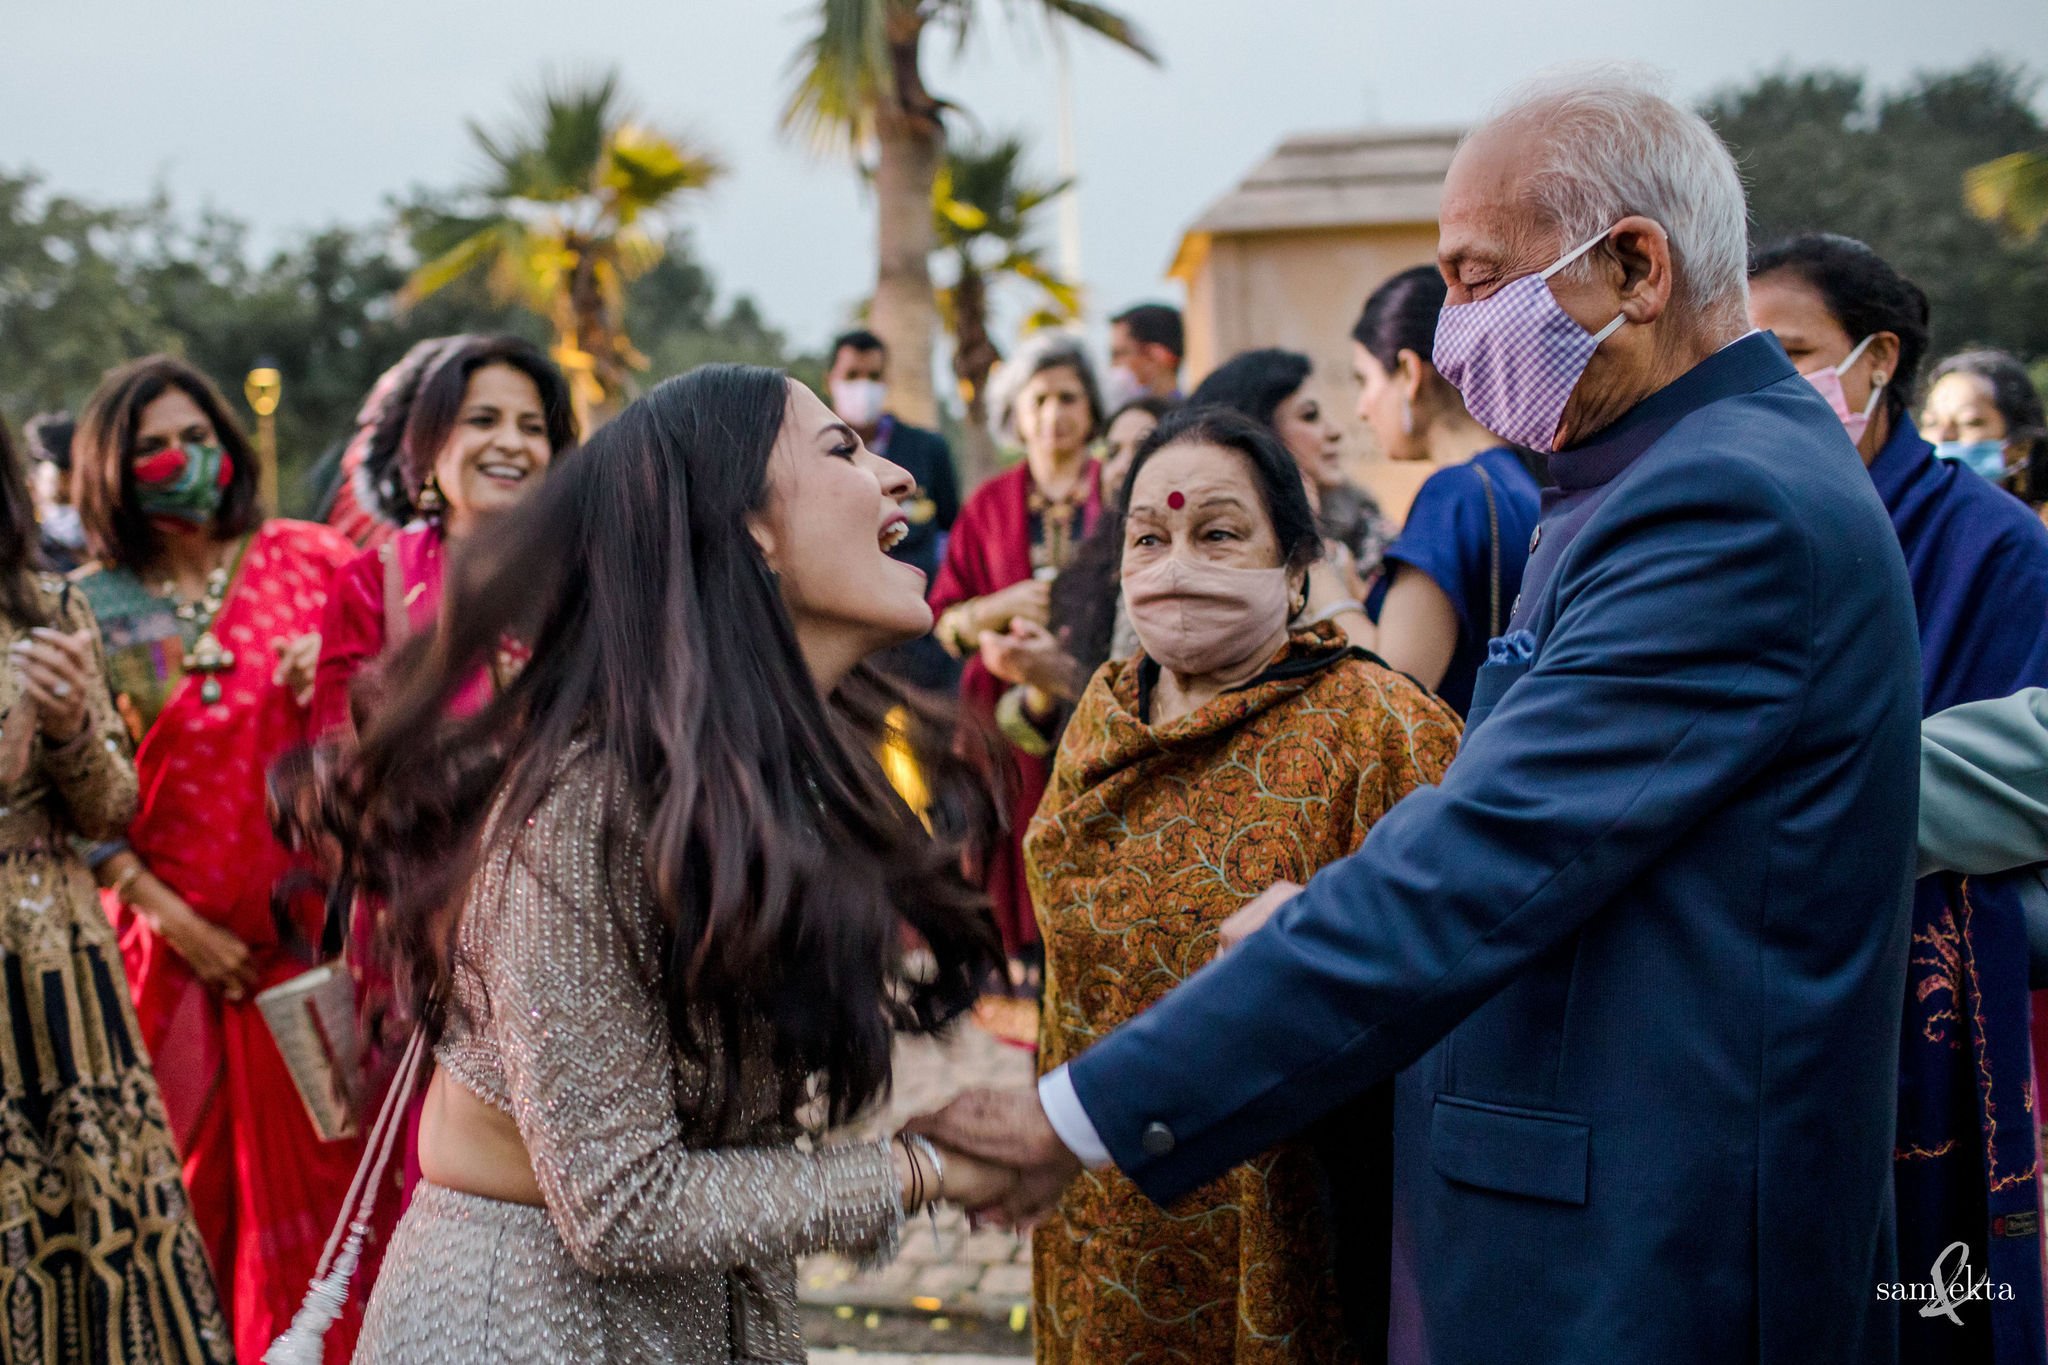 Clearly, age is no bar when it comes to adding to the energy at the baraat - here, Saba dances with her grandparents